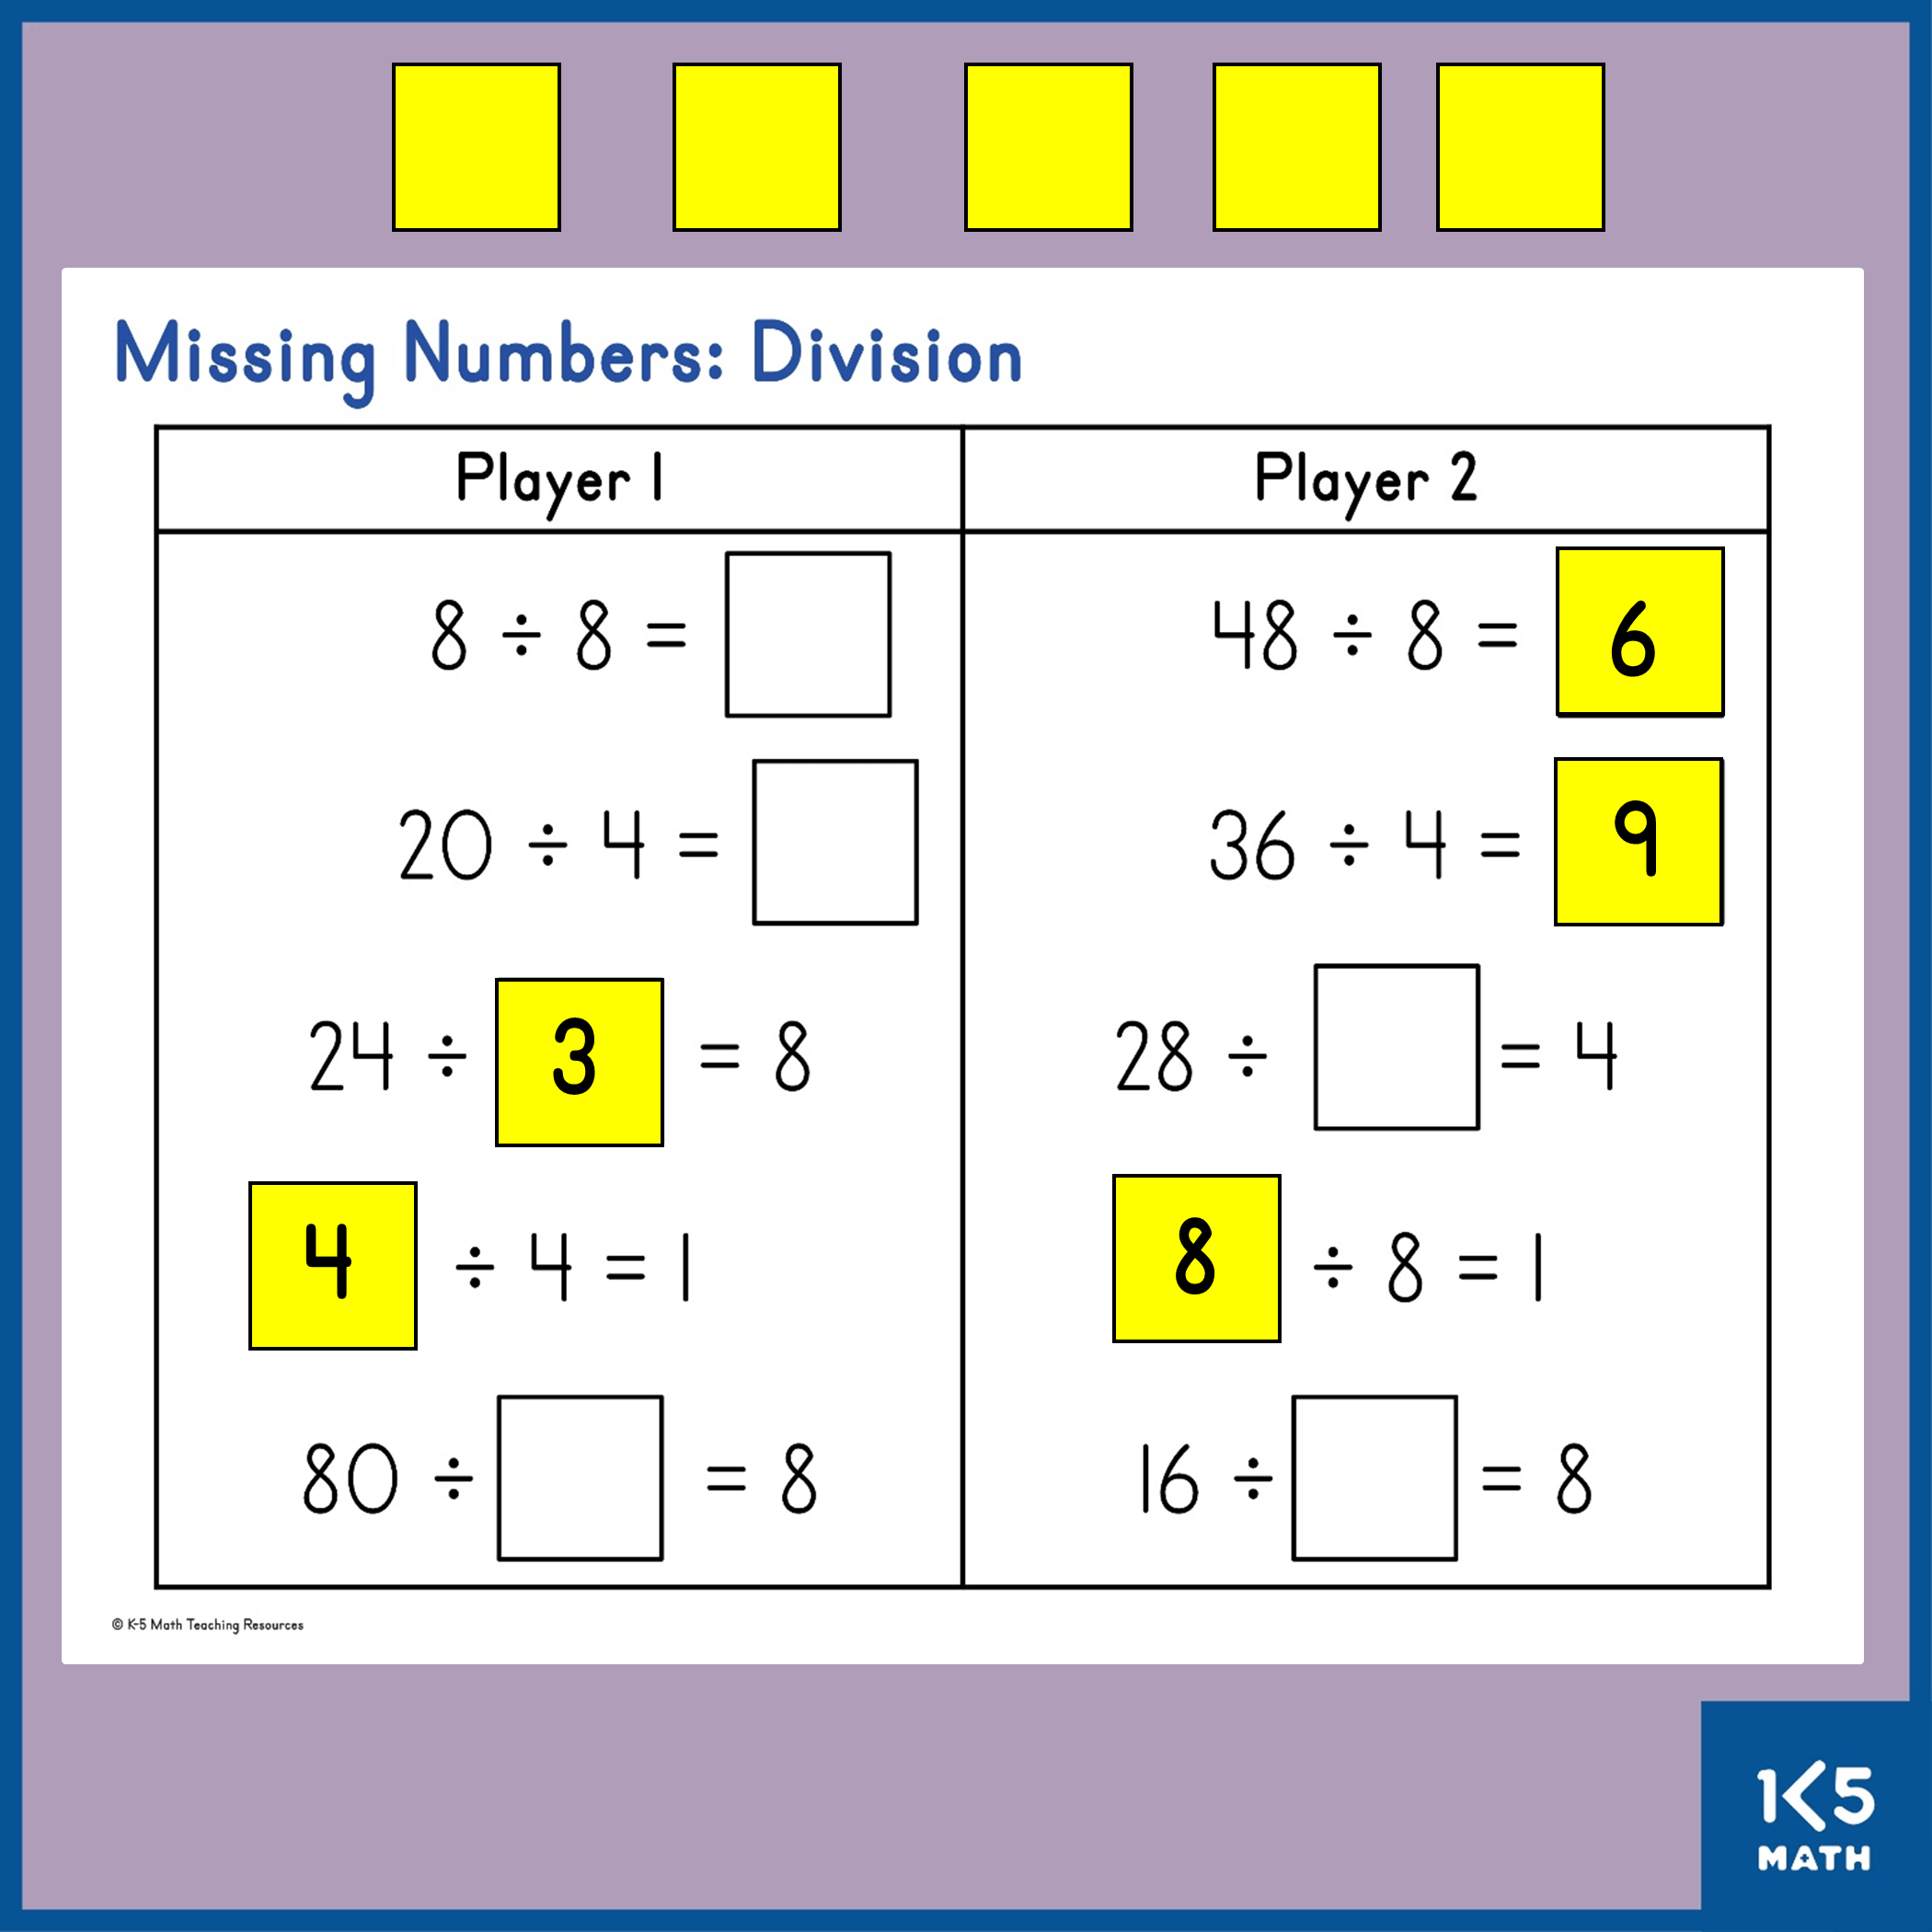 Missing Numbers: Division